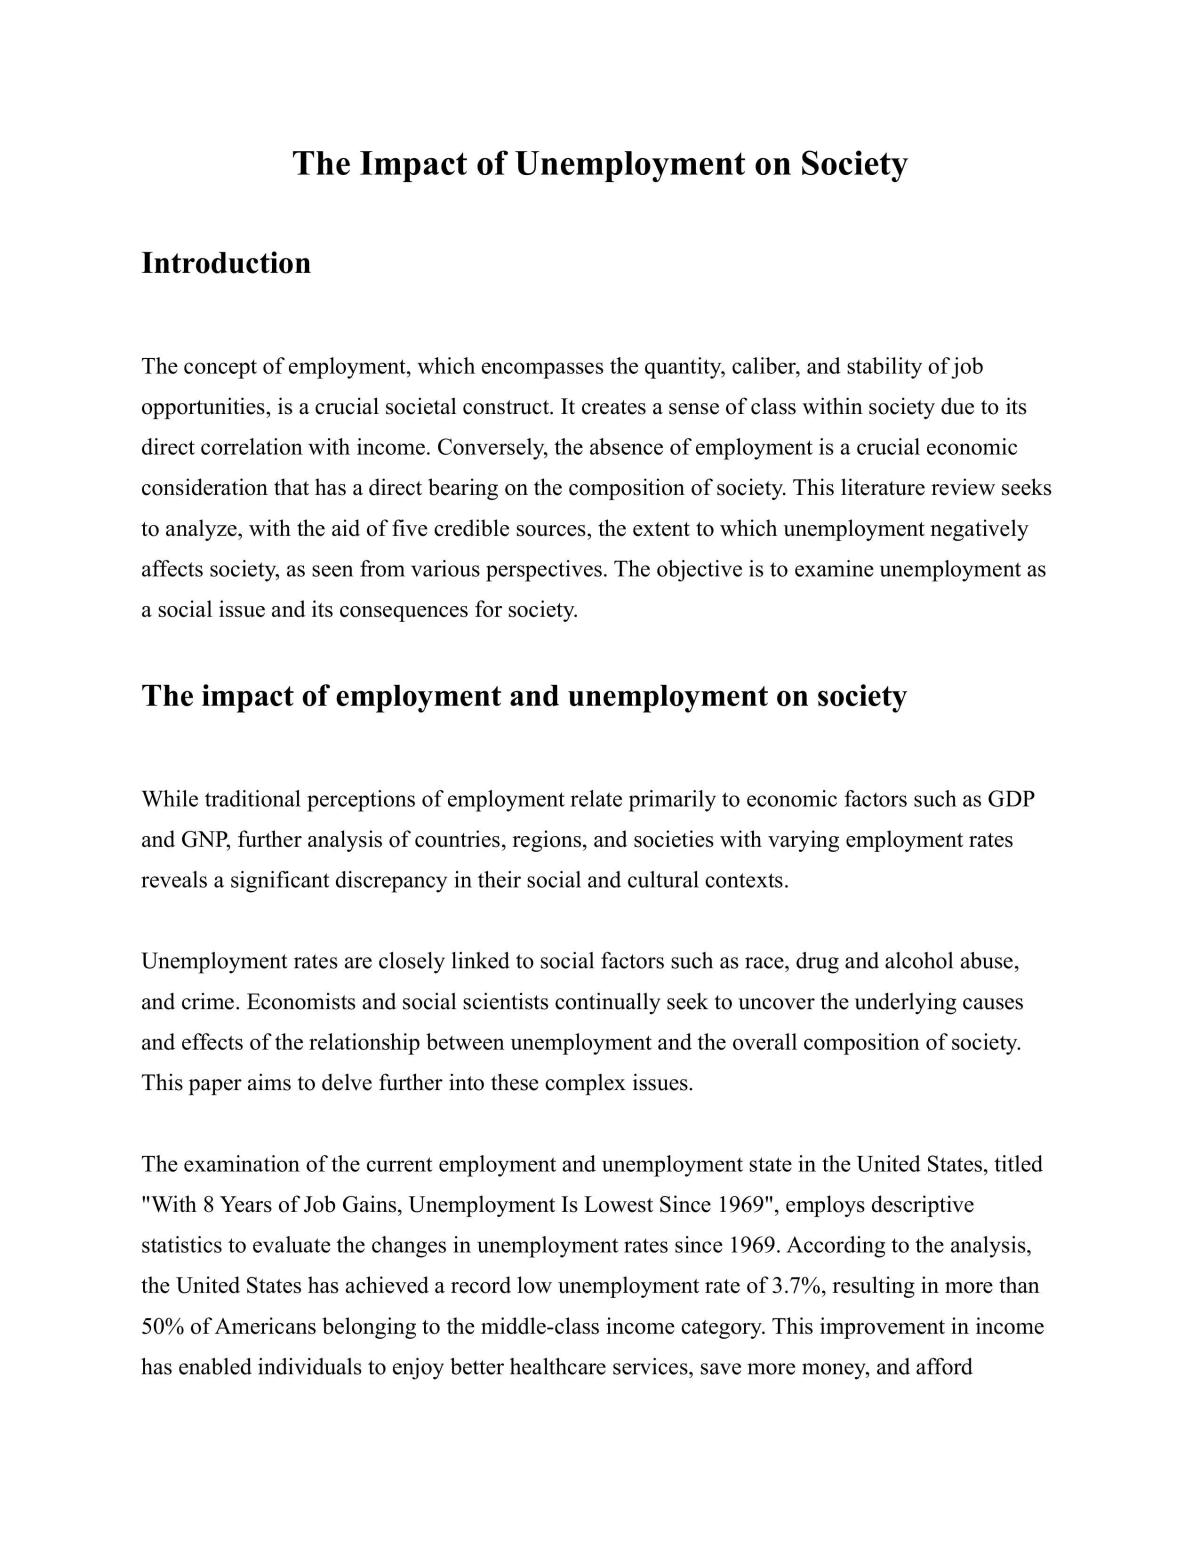 The Impact of Unemployment on Society - Page 1